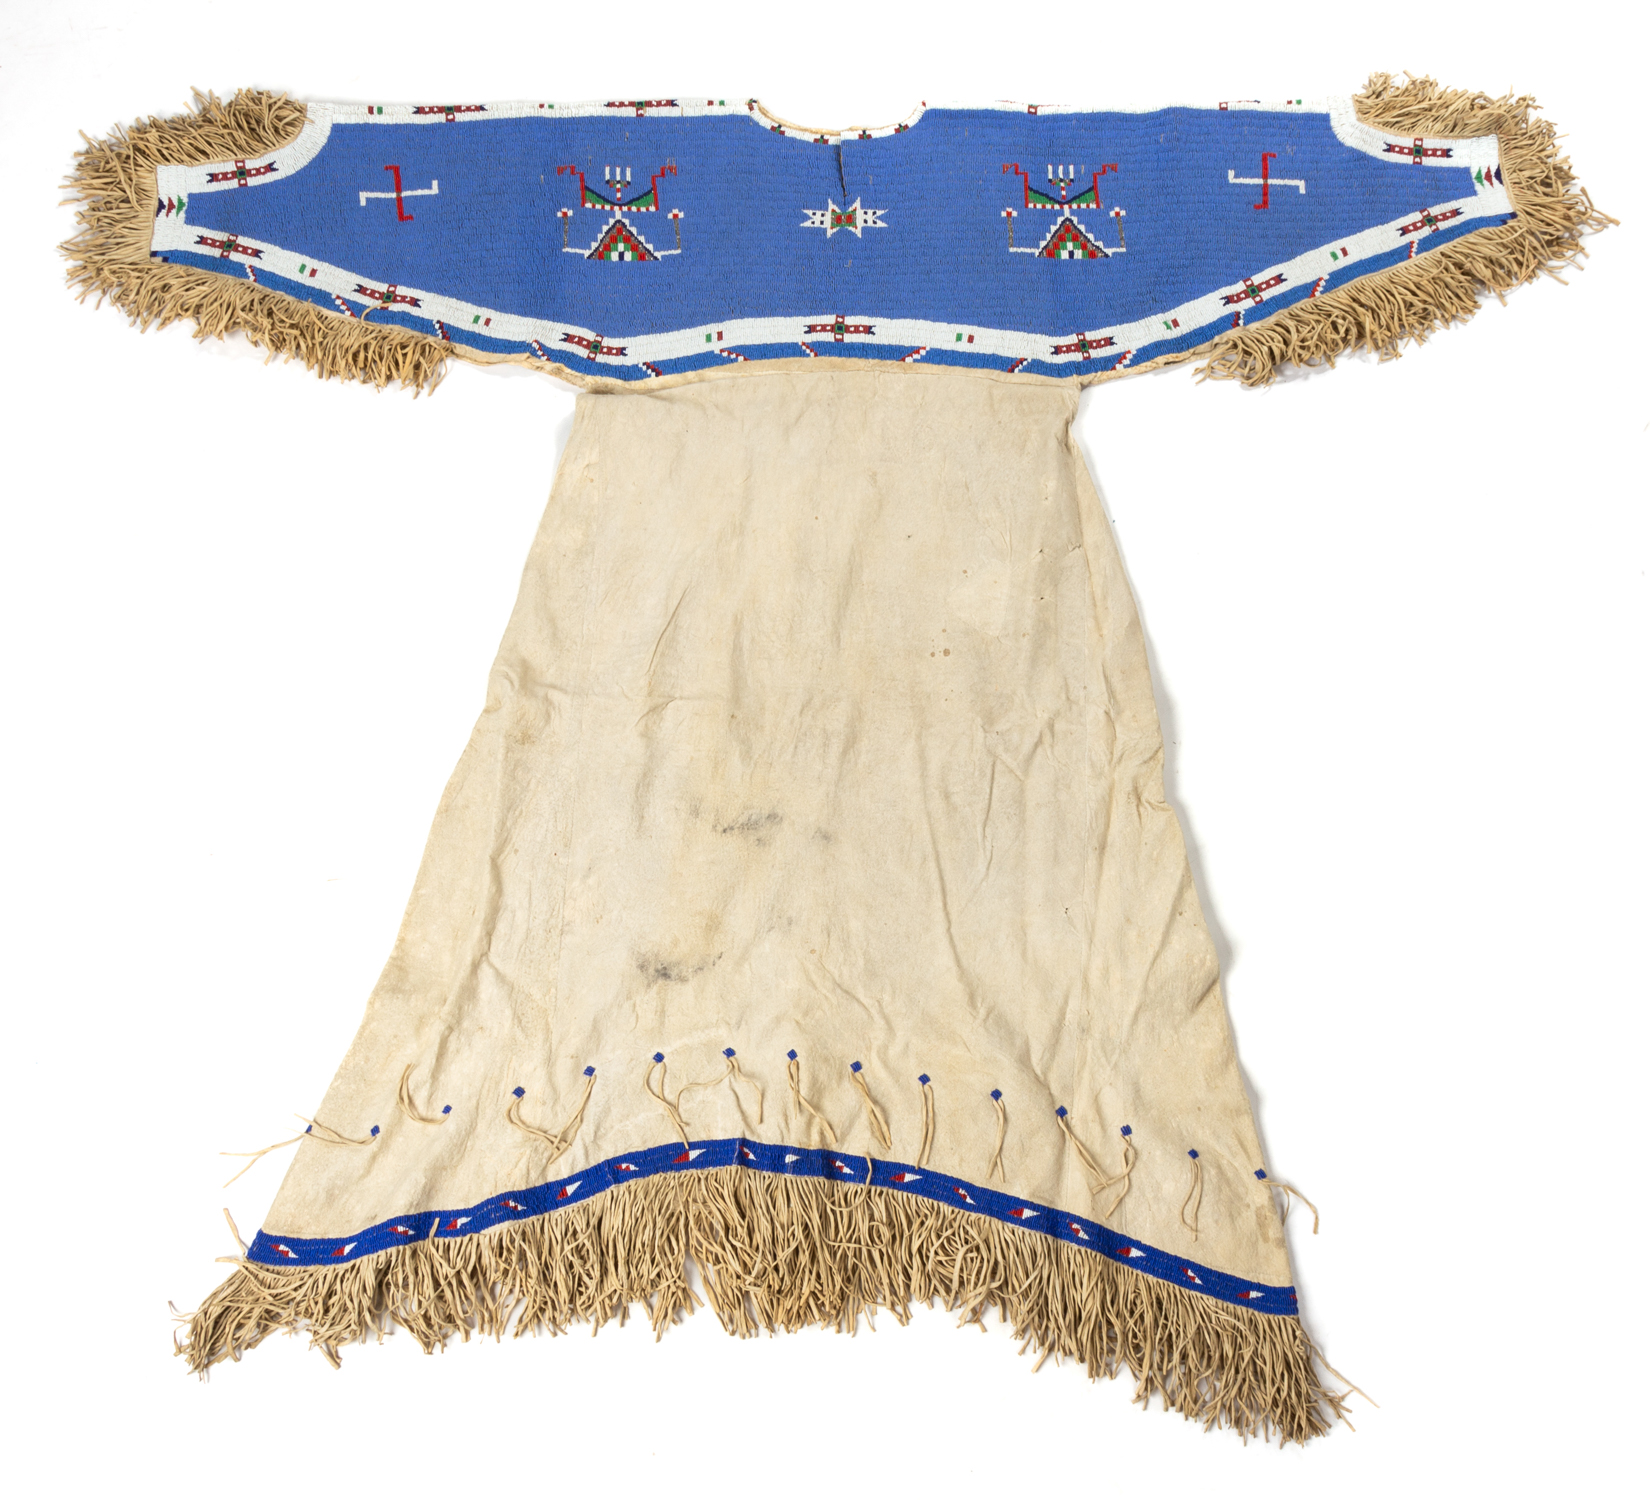 CHEYENNE WOMAN S DRESS WITH WHIRLING 2faf7b1